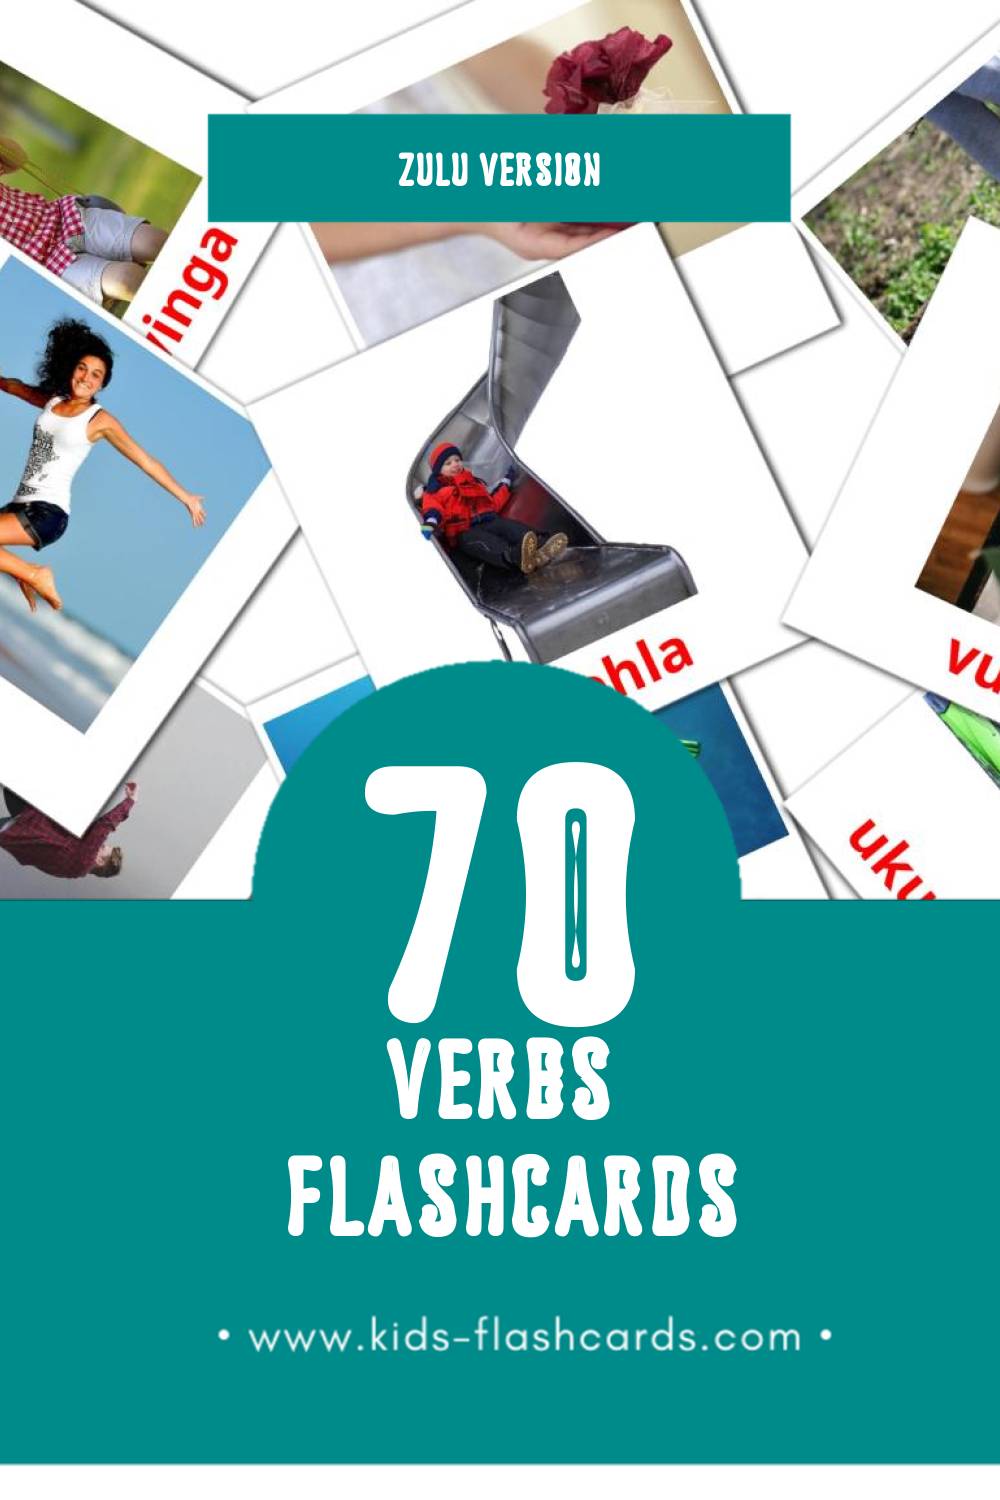 Visual Izenzo  Flashcards for Toddlers (70 cards in Zulu)